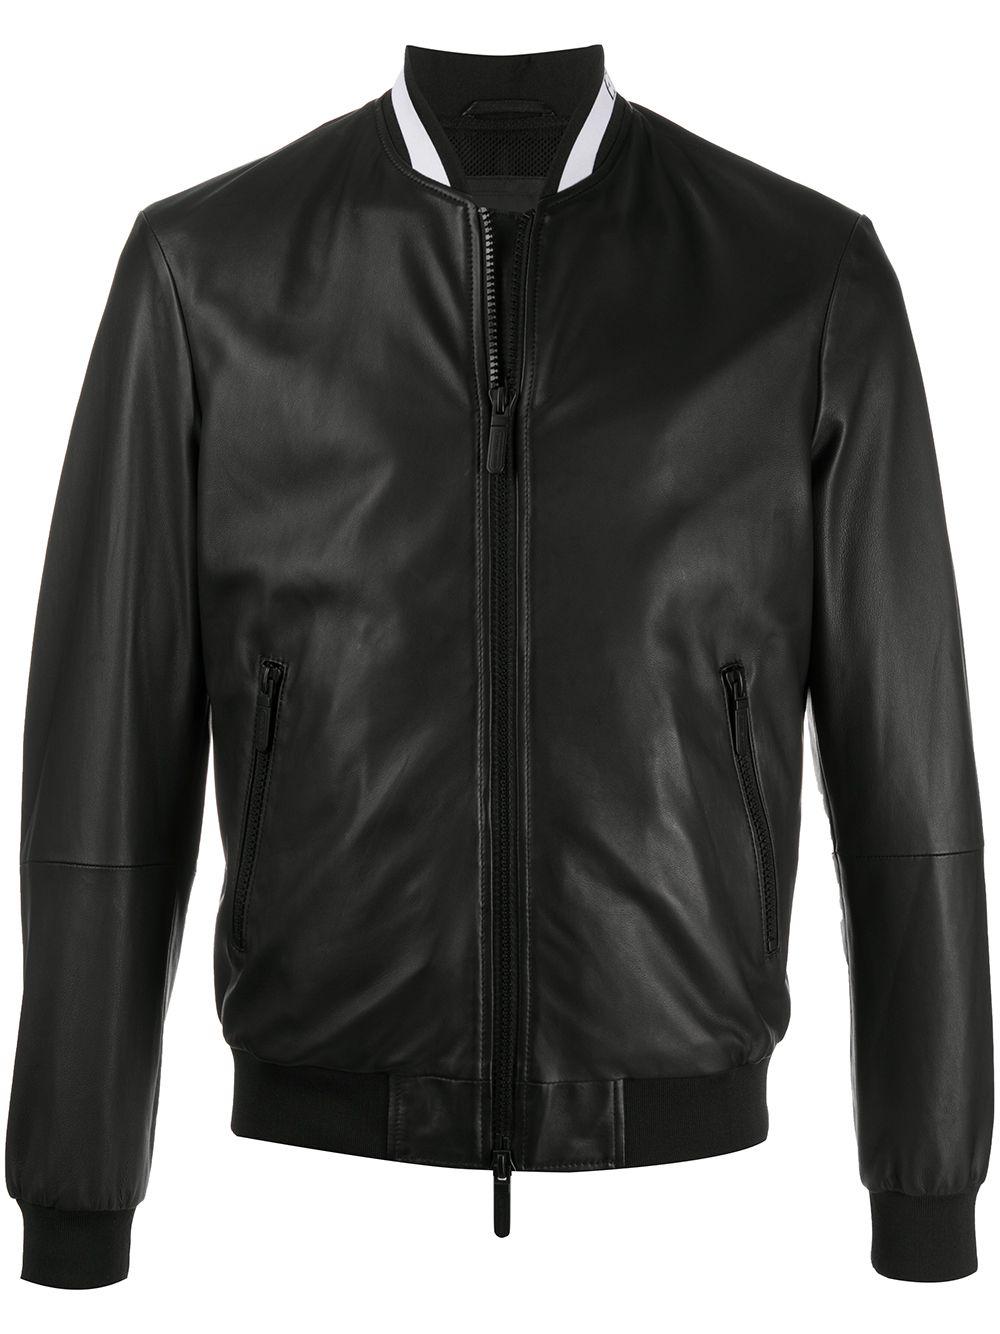 Emporio Armani Leather Bomber Jacket in Black for Men - Lyst